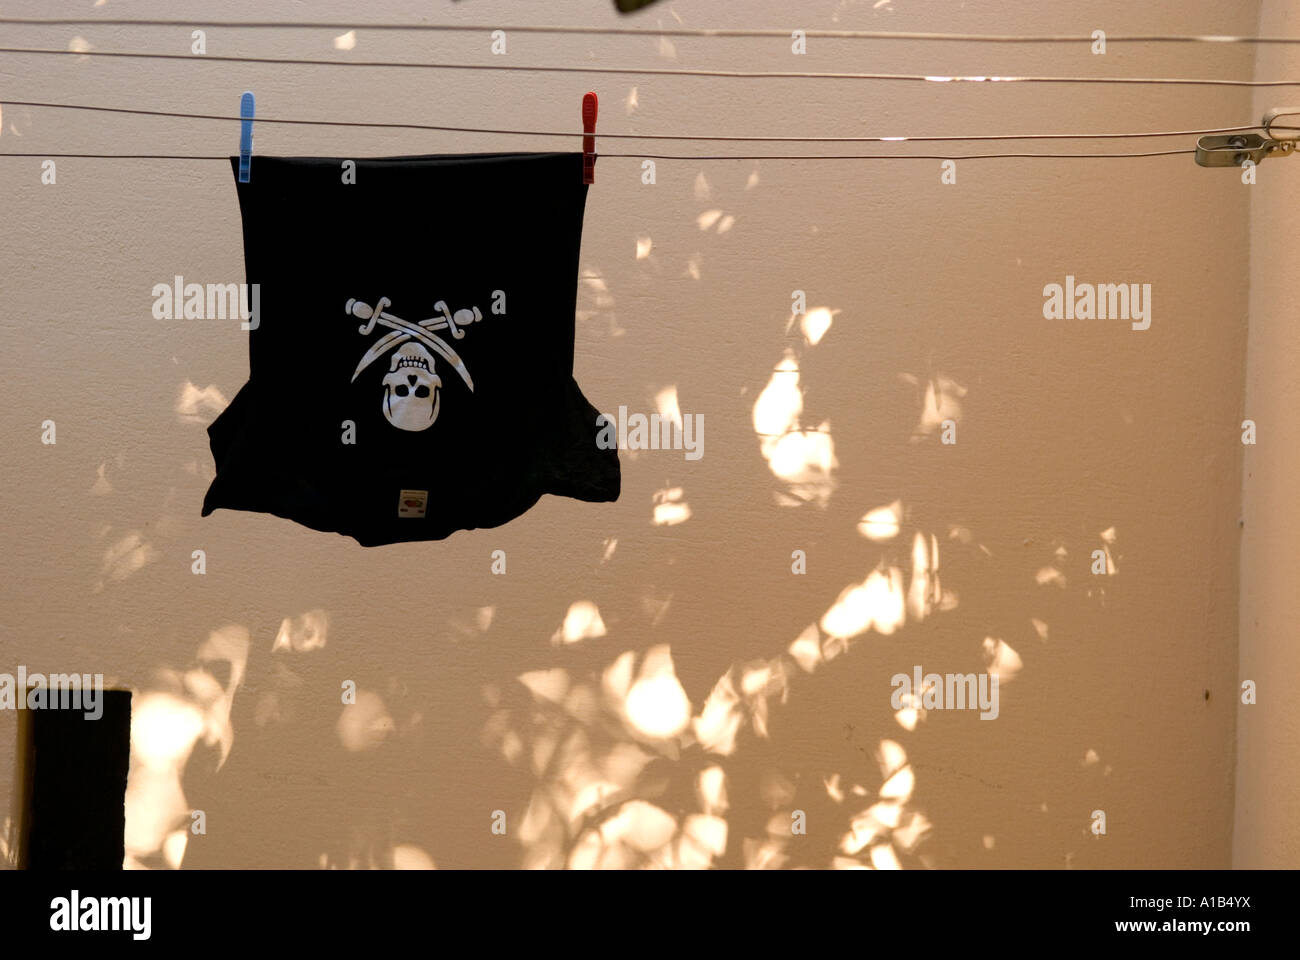 a kids black t-shirt with a white skull and crossbones hangs to dry on a washing line Stock Photo